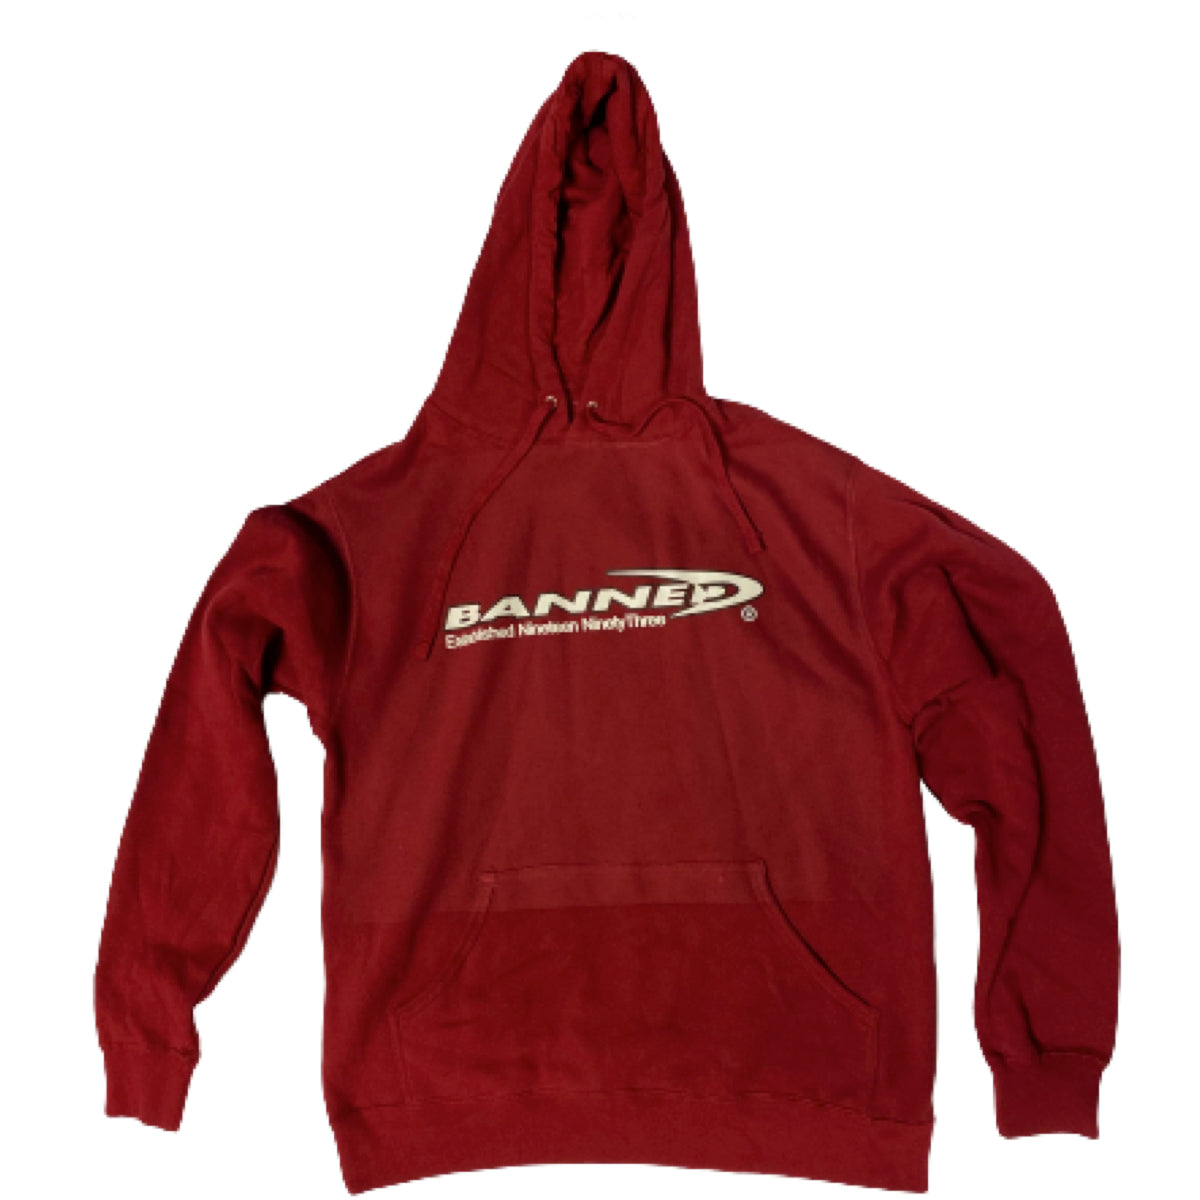 BANNED® Arrow Pullover Hoodie